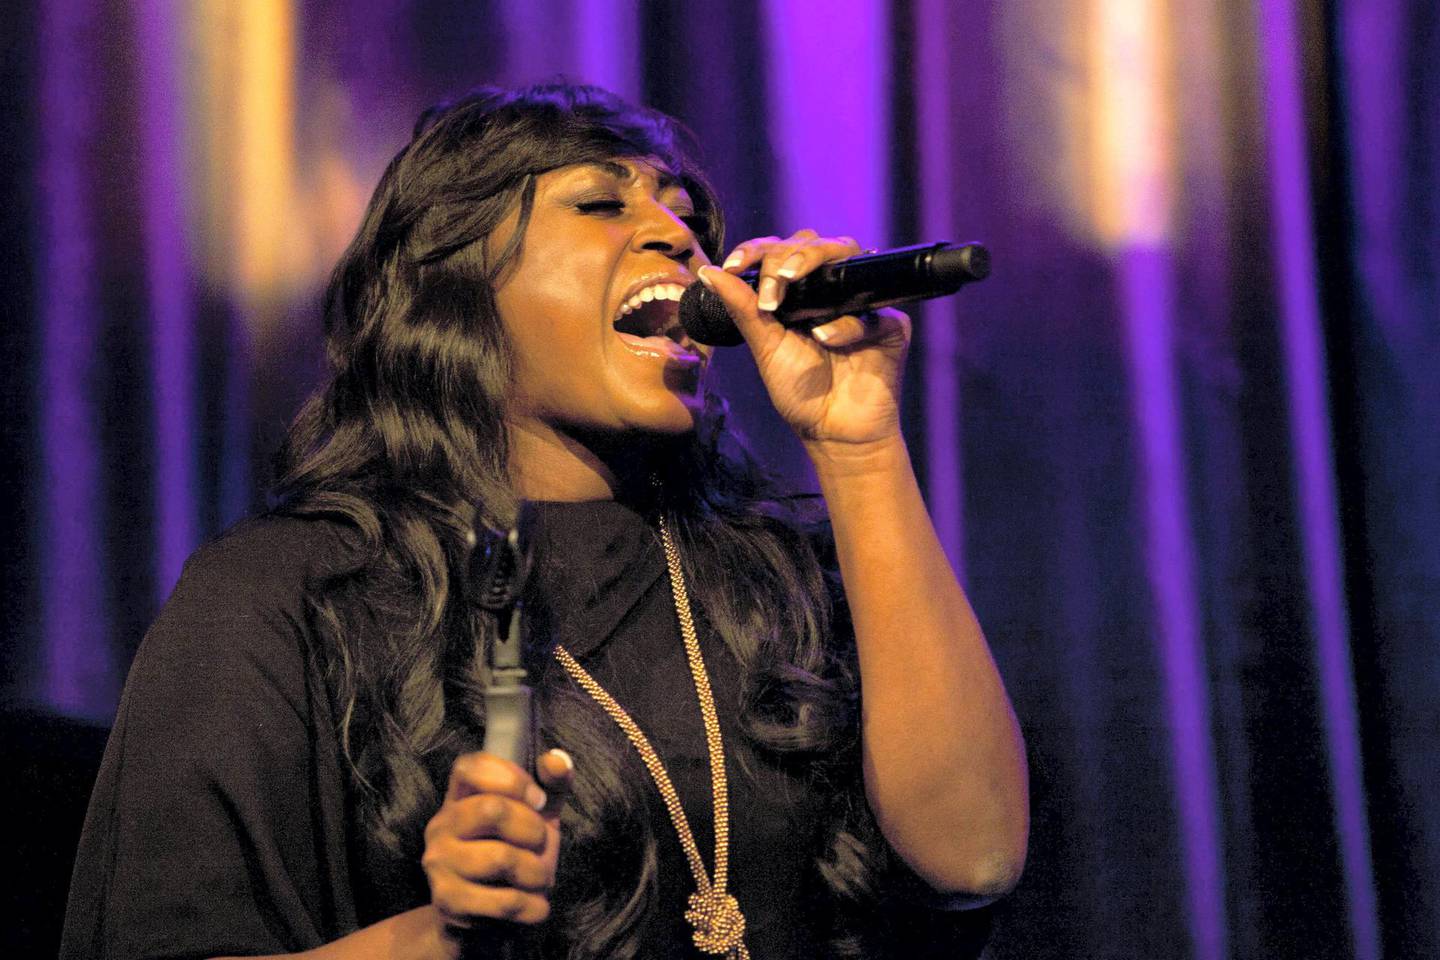 LONDON, ENGLAND - APRIL 18:  Mica Paris performs at "An Evening With Mitch Winehouse" in aid of the Amy Winehouse Foundation at The Hippodrome on April 18, 2014 in London, England.  (Photo by David M. Benett/Getty Images)